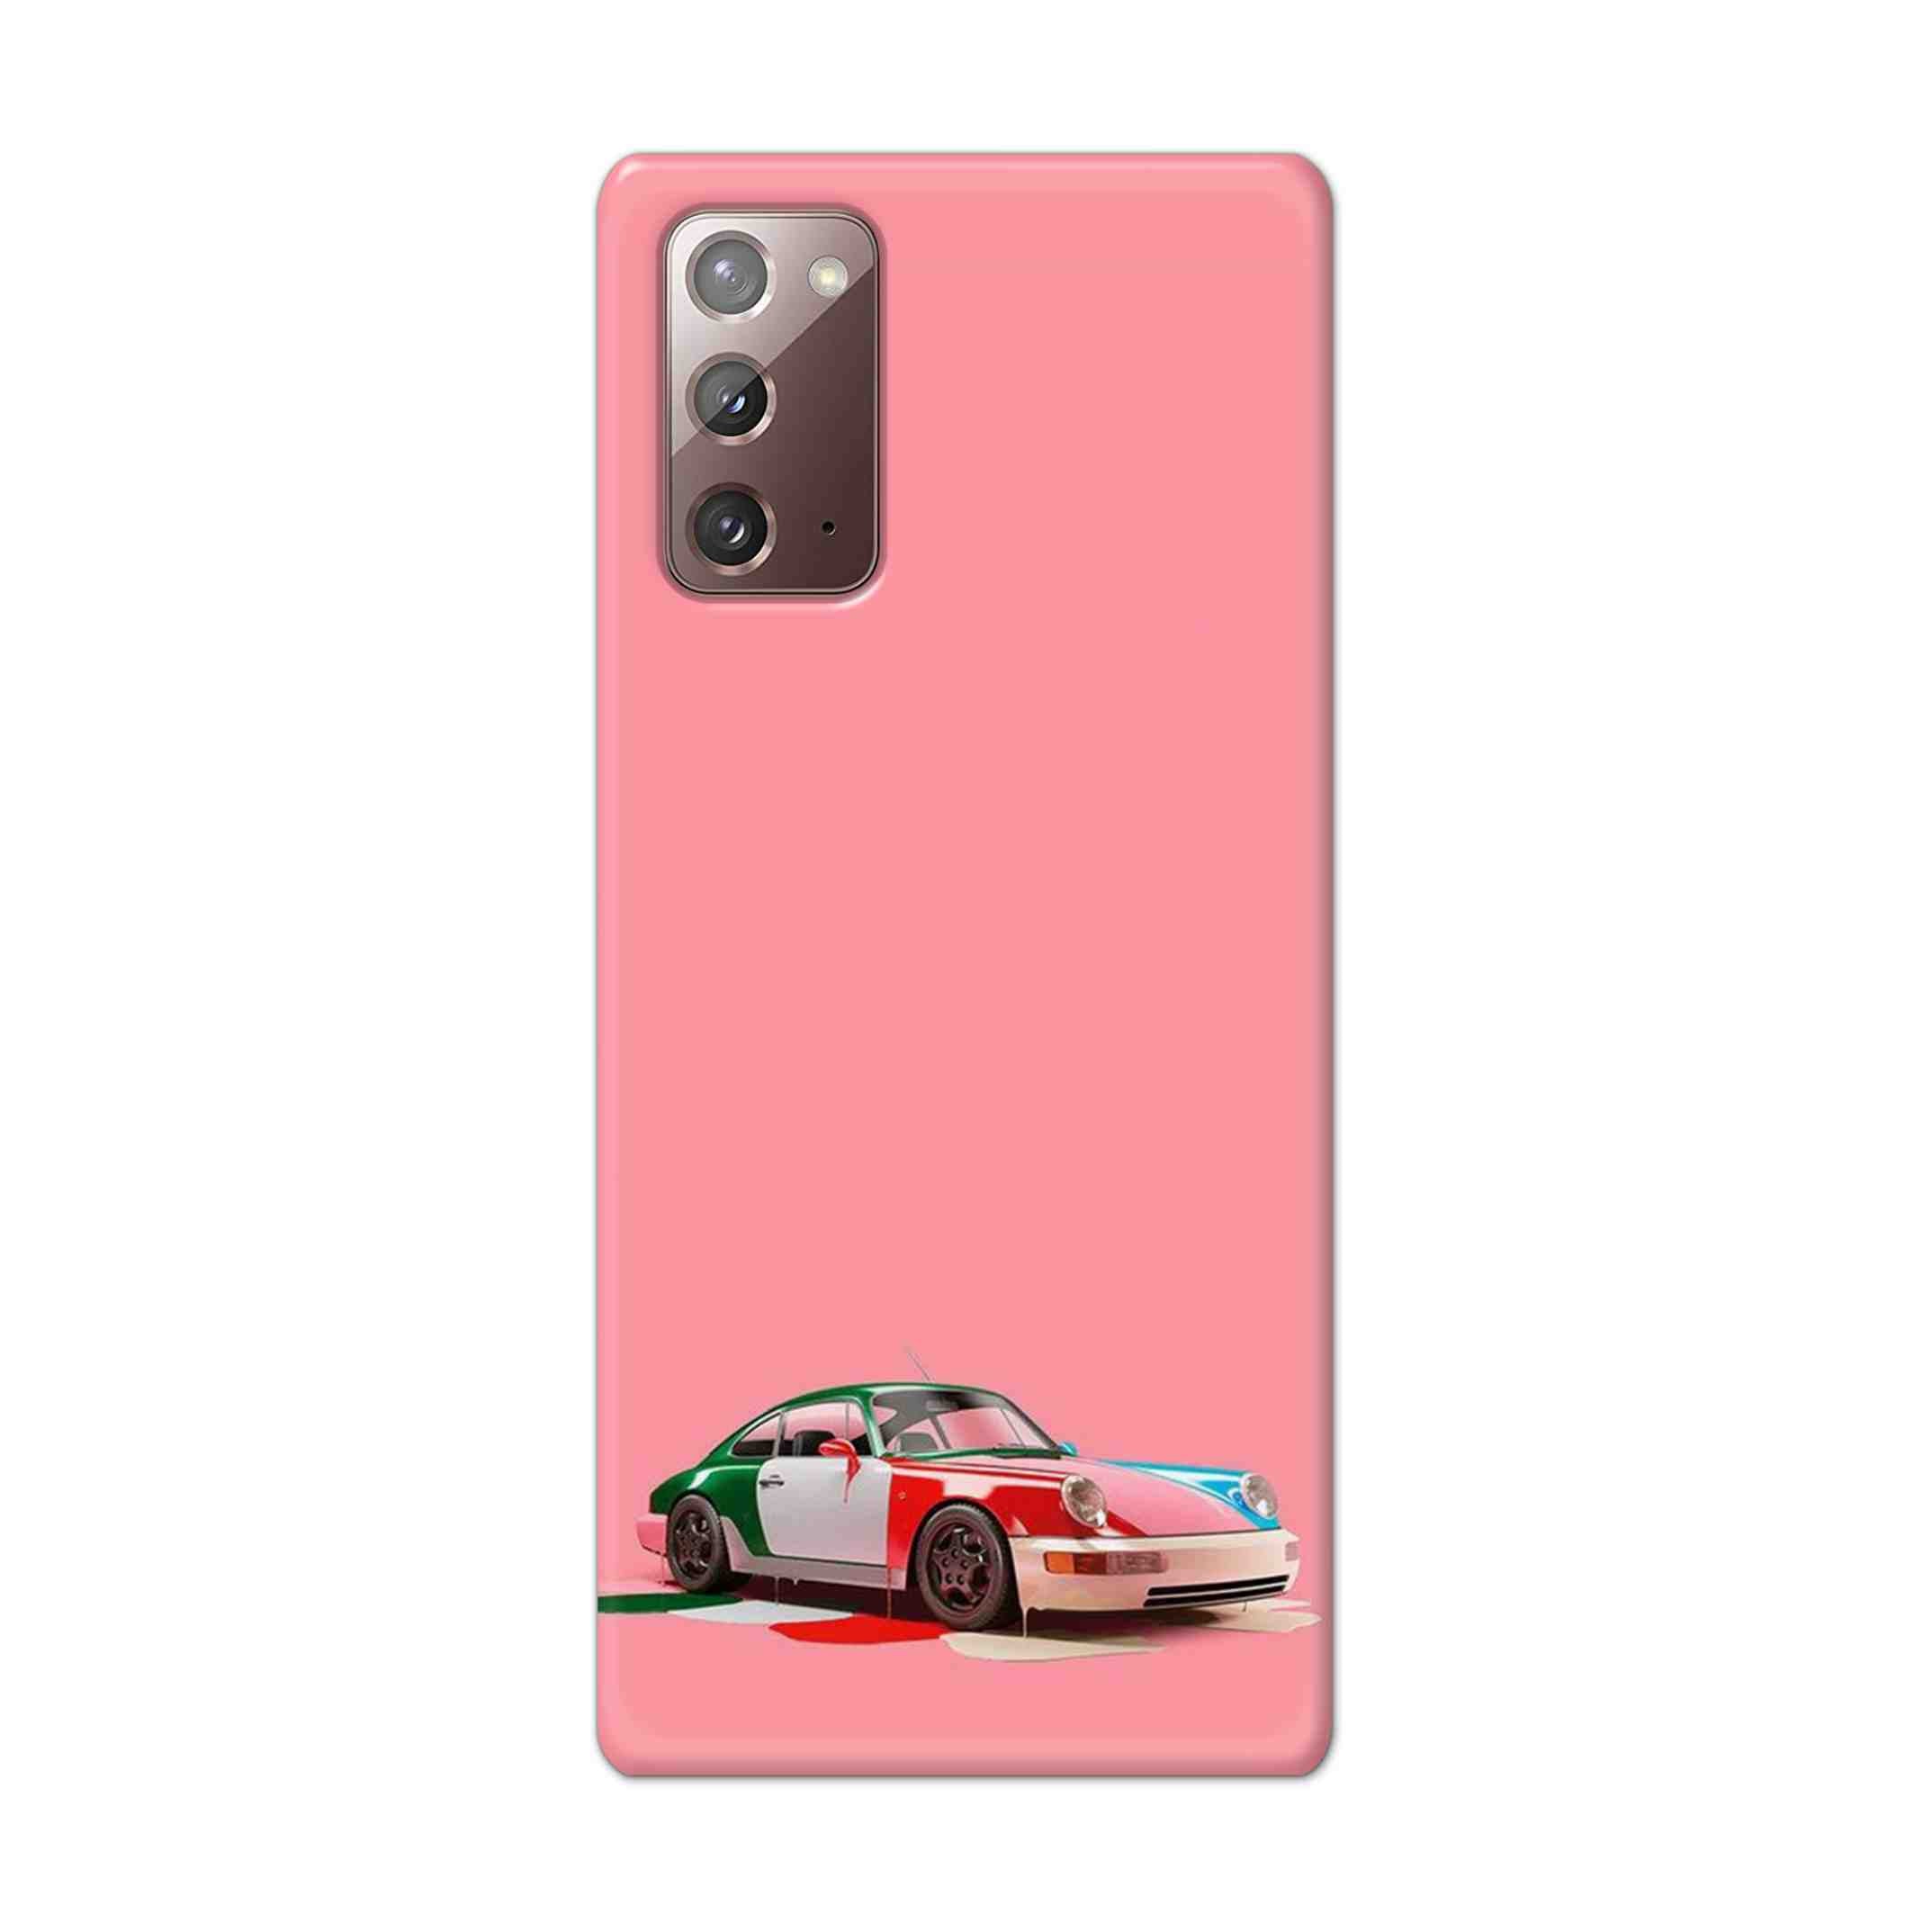 Buy Pink Porche Hard Back Mobile Phone Case Cover For Samsung Galaxy Note 20 Online